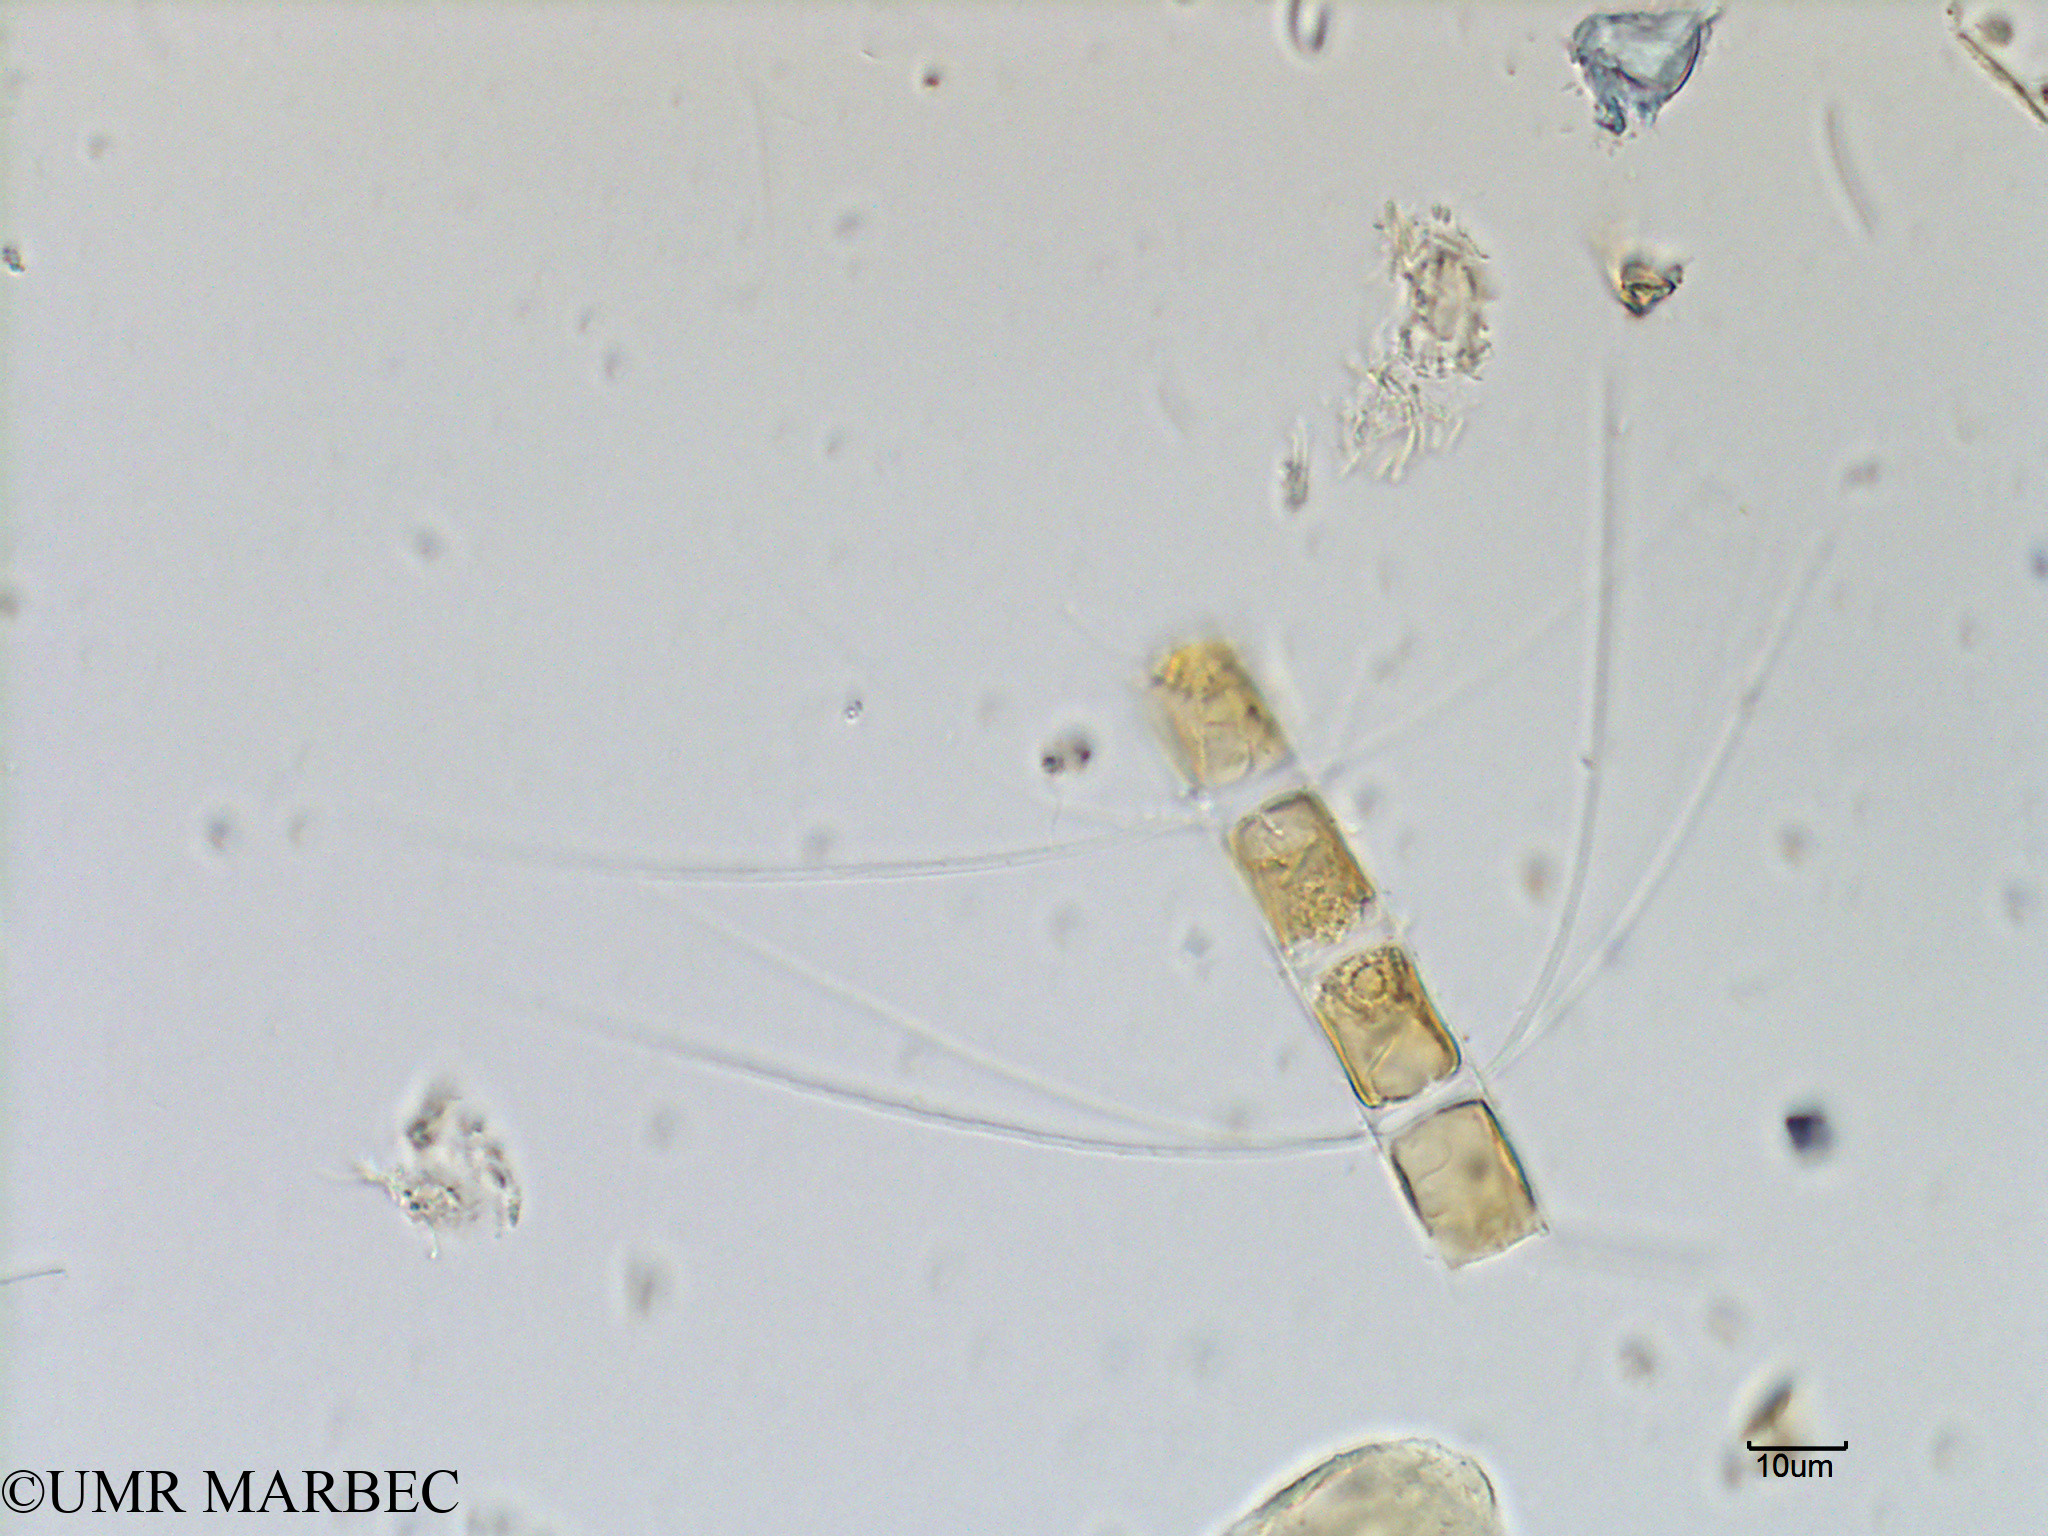 phyto/Scattered_Islands/mayotte_lagoon/SIREME May 2016/Chaetoceros sp34 (MAY5_cf chaetoceros sp -9).tif(copy).jpg